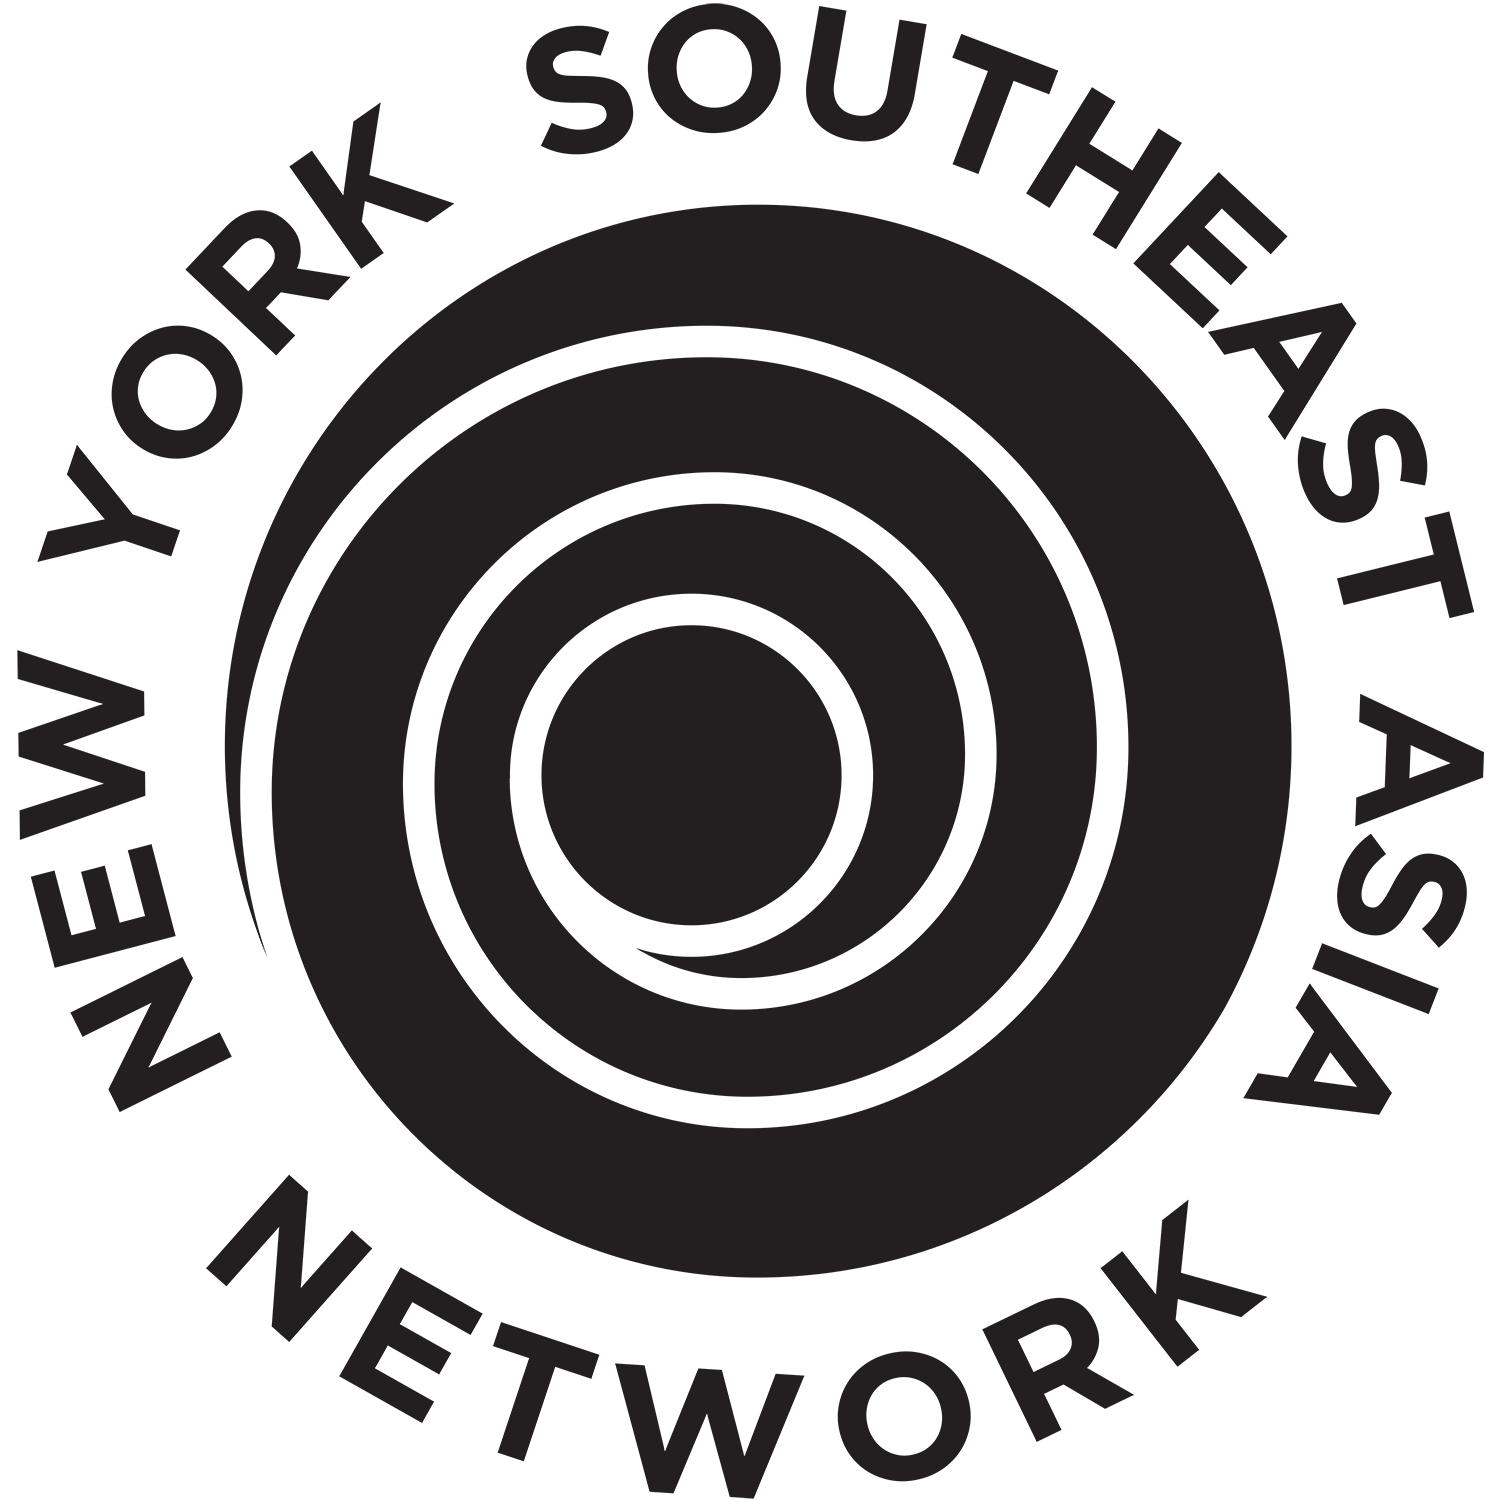 Next Call for Proposals: NYSEAN Partners Fund Due Oct. 1, 2019. — New York Southeast Asia Network